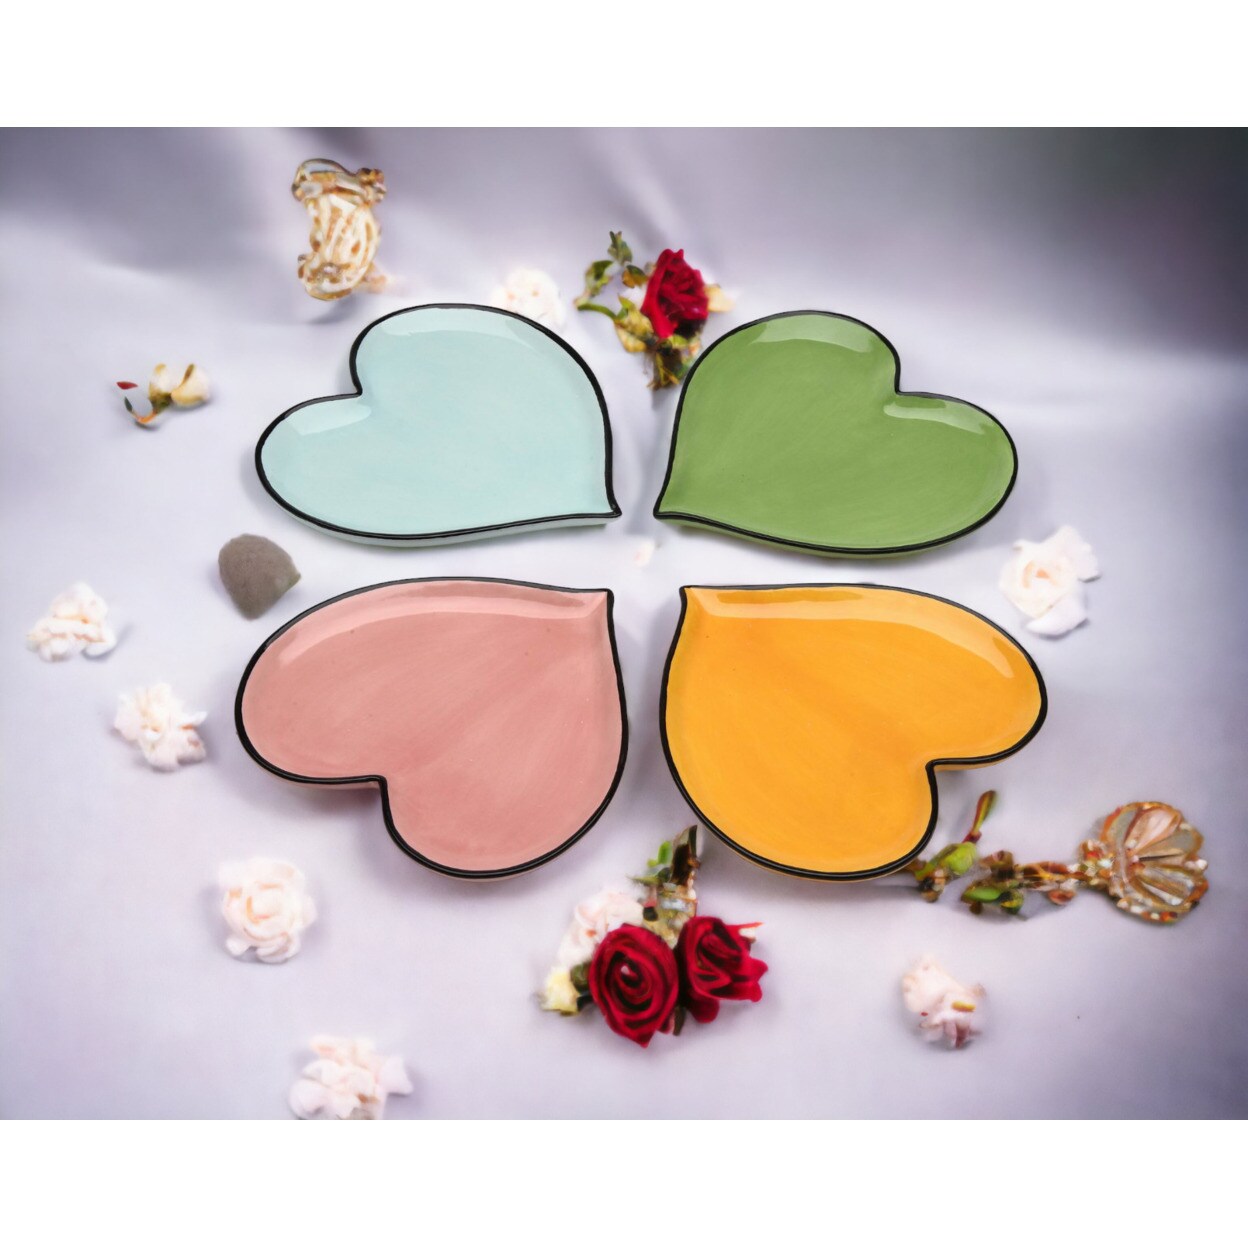 kevinsgiftshoppe Ceramic Rainbow Plates: Assorted Colors Heart-Shaped Plates Valentines Wedding Decor or Gift Wedding Favor Anniversary